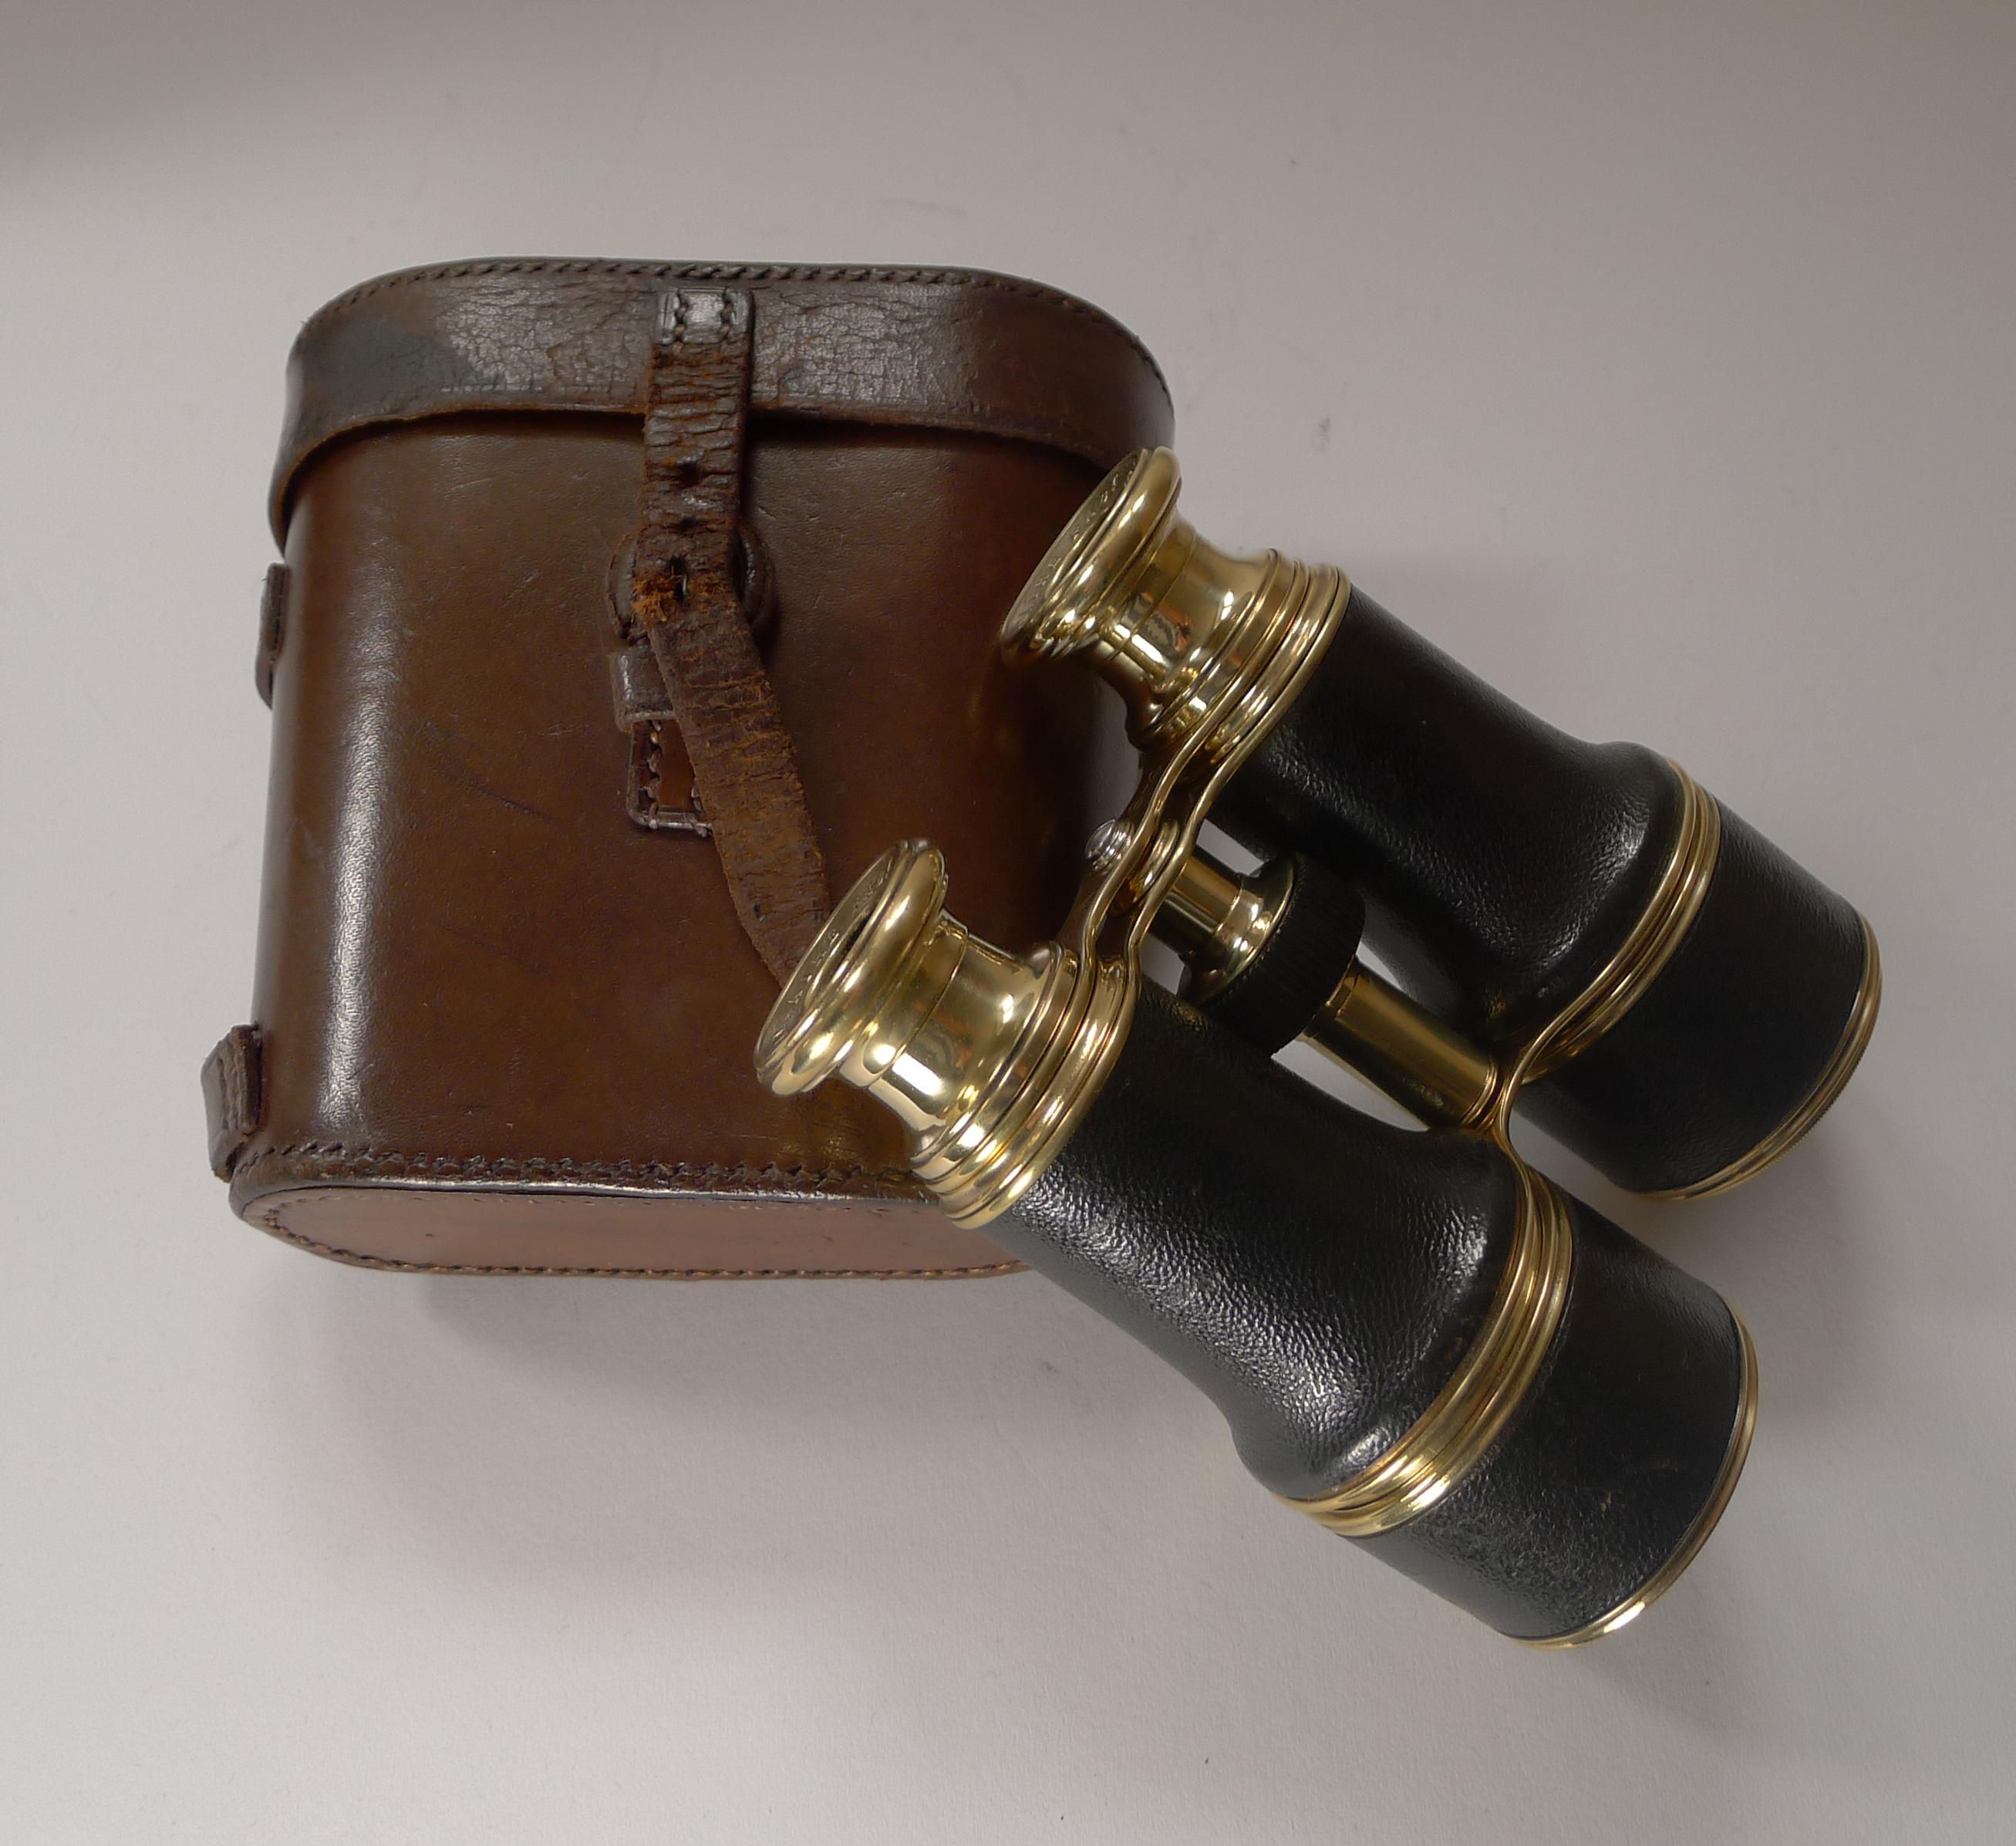 French Pair WW1 Binoculars and Case, British Officer's Issue, 1916, Lemaire, Paris